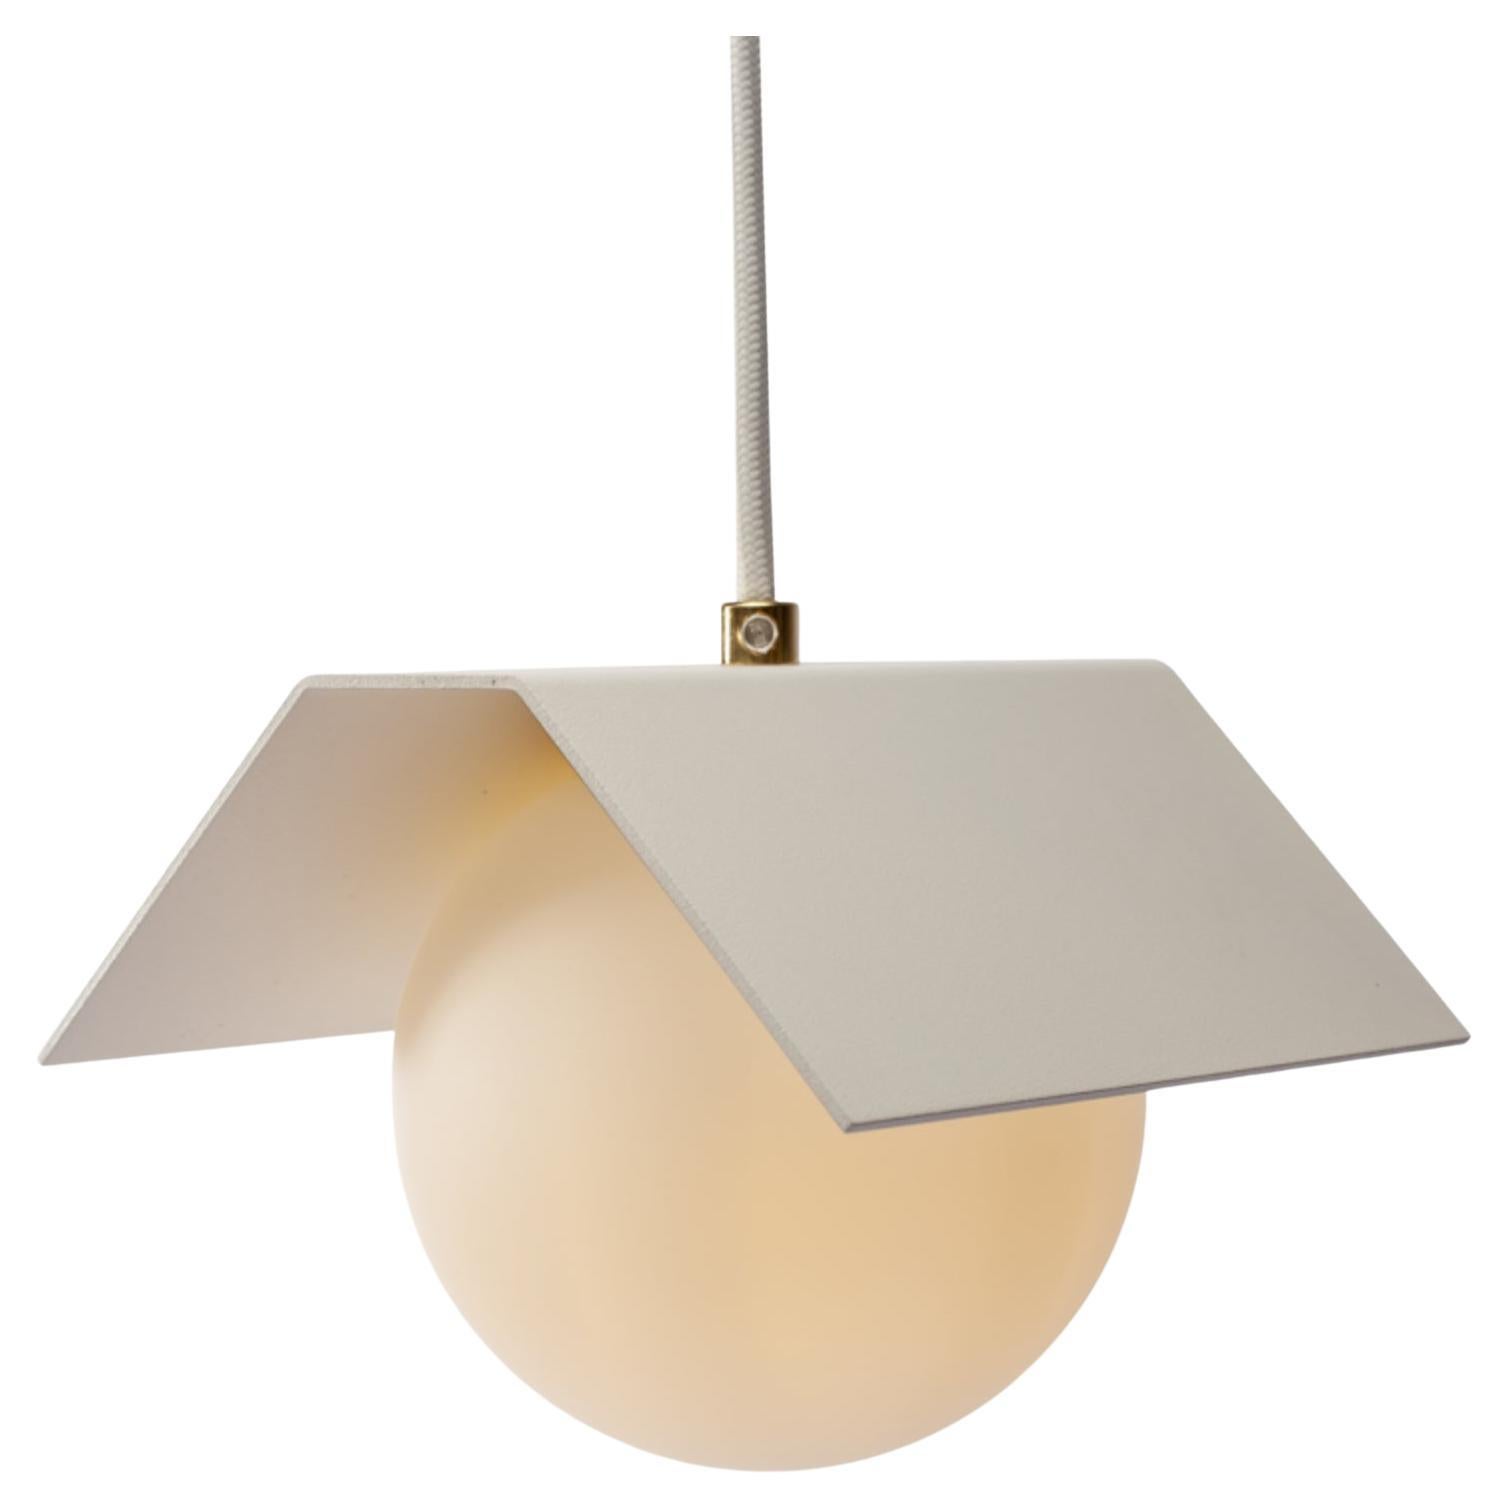 Twain Ex Pure White Suspended Light by Lexavala For Sale